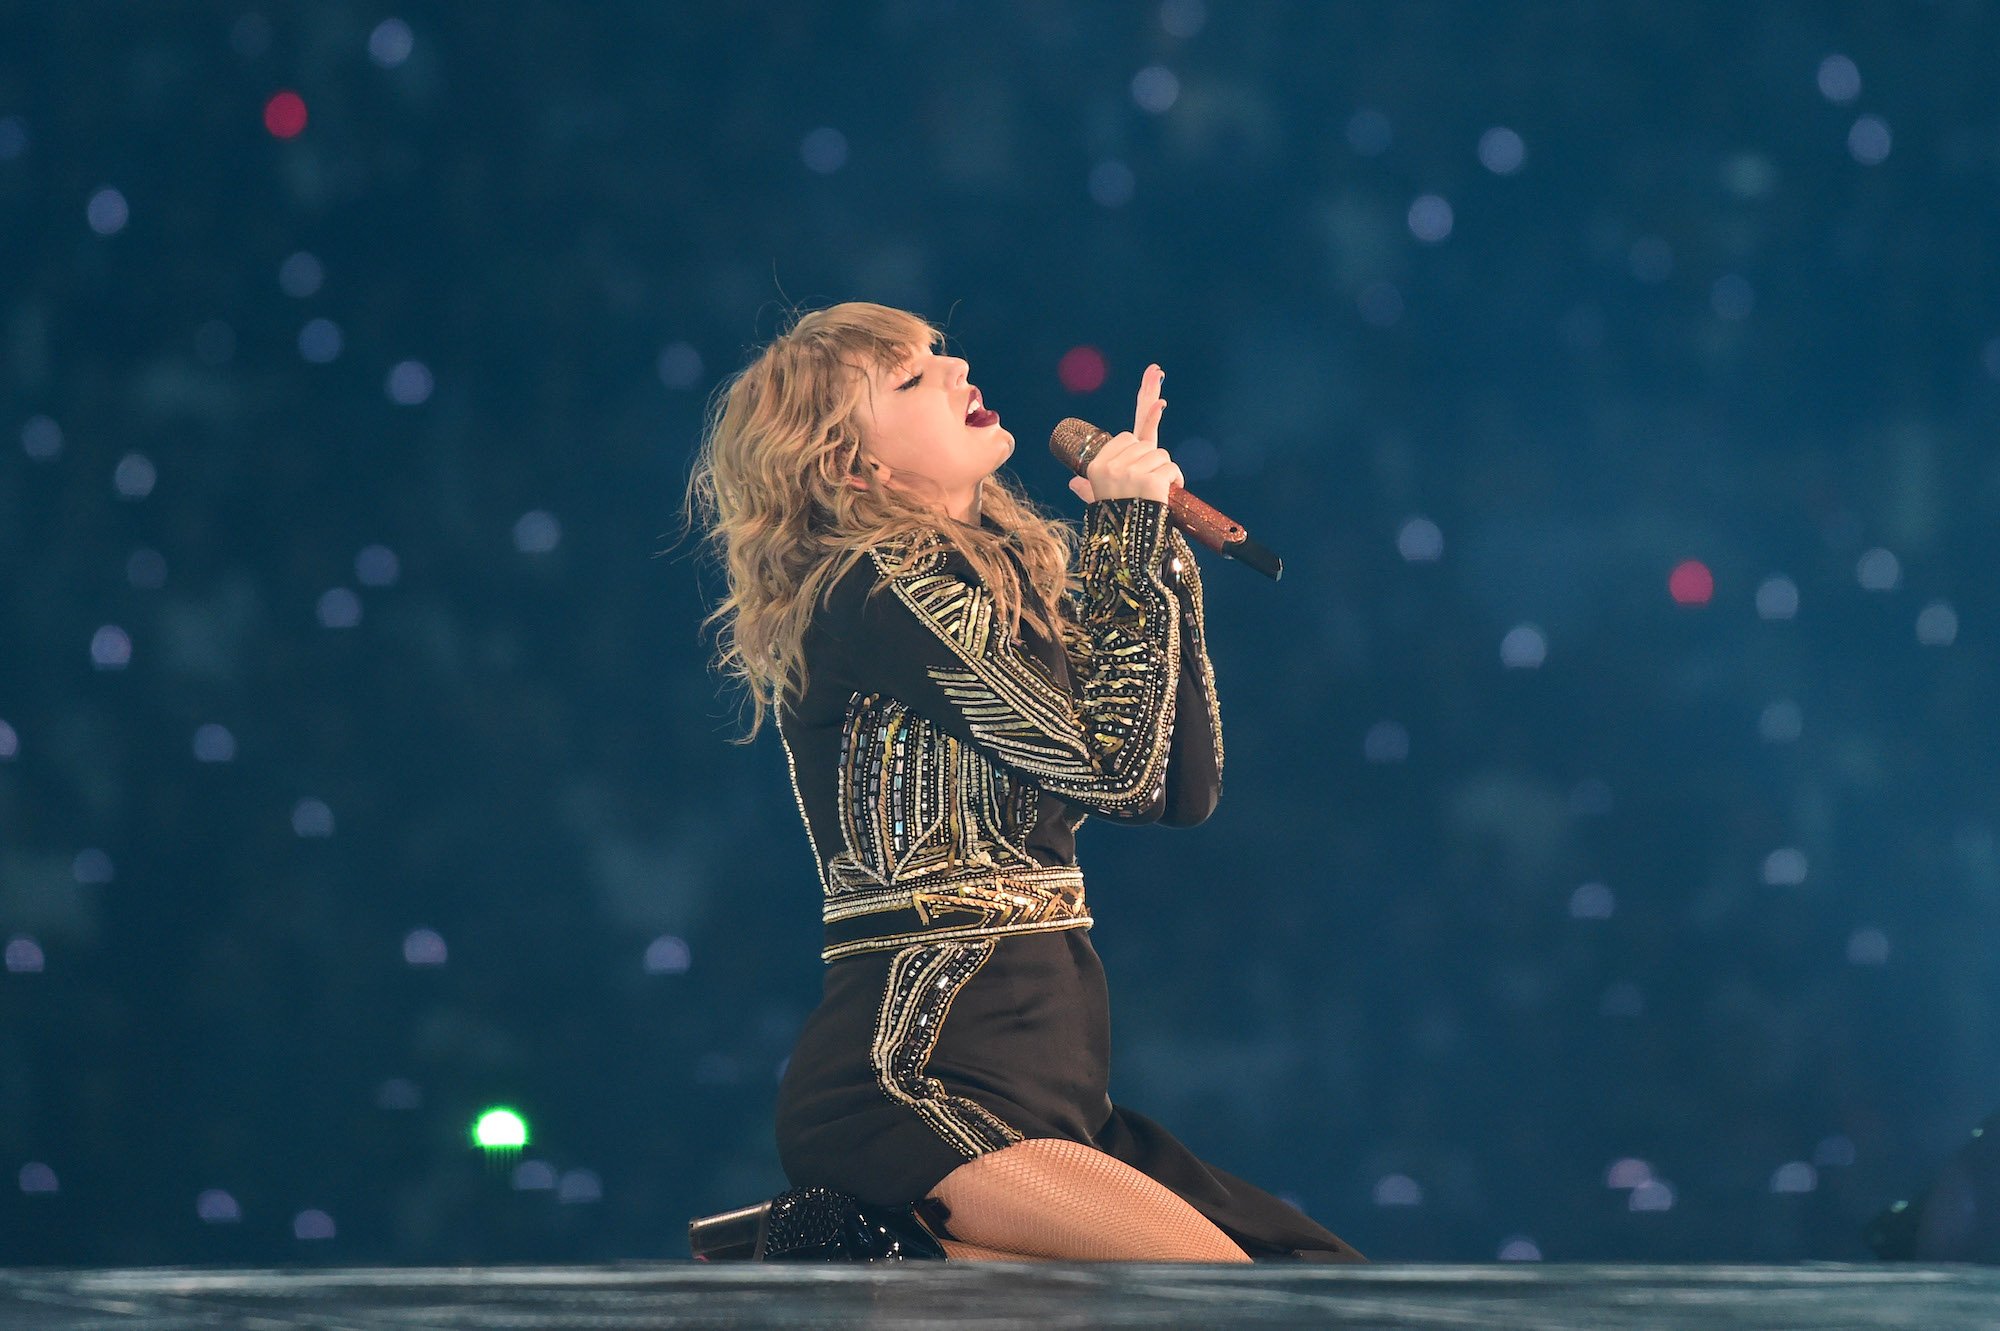 Taylor Swift performs during the 'reputation' Stadium Tour in Japan on Nov. 21, 2018